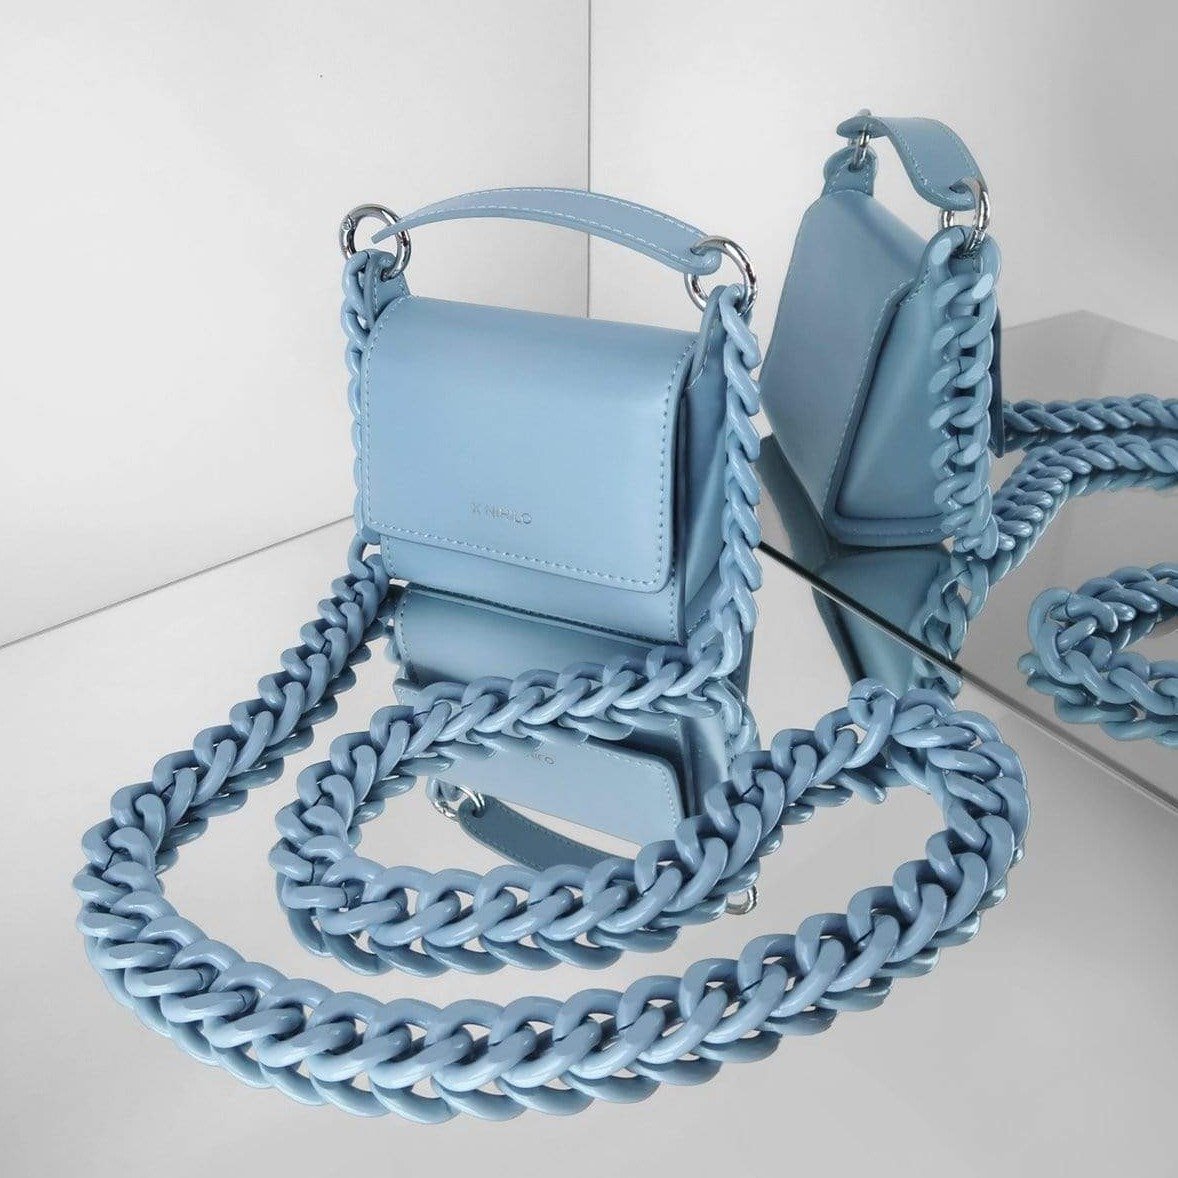 X NIHILO - TRANQUIL MINI LEATHER SHOULDER BAG - BLUE Coiled strap